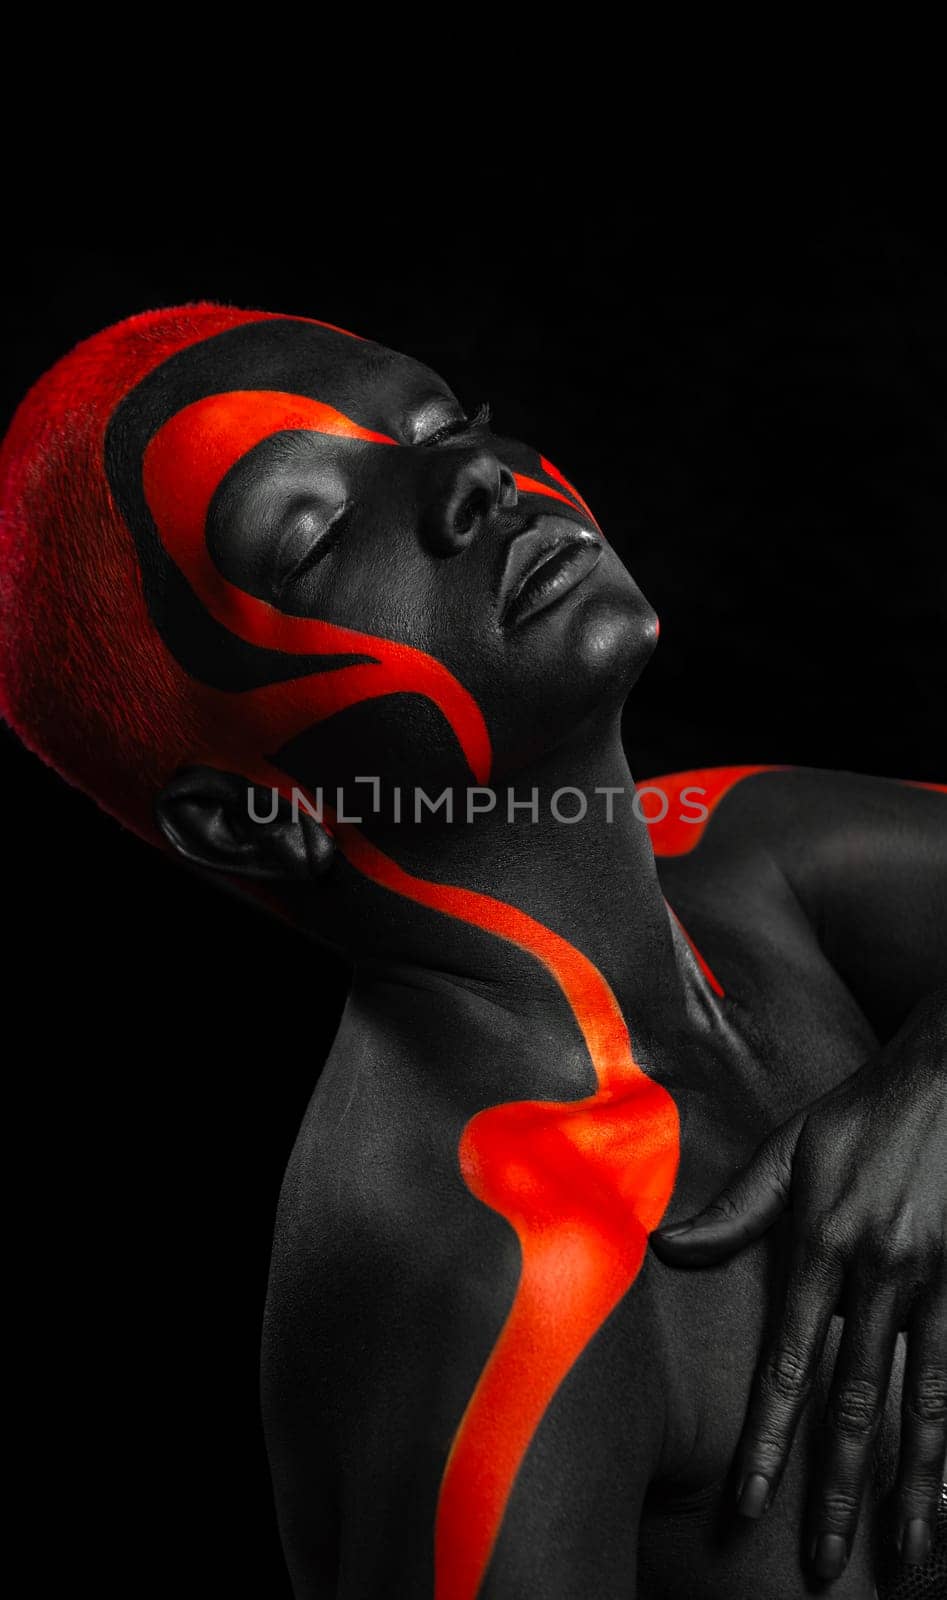 The Art Face. How To Make A Mixtape Cover Design - Download High Resolution picture with black and red body paint on african woman for your music song. Create album template with creative Image. by MikeOrlov